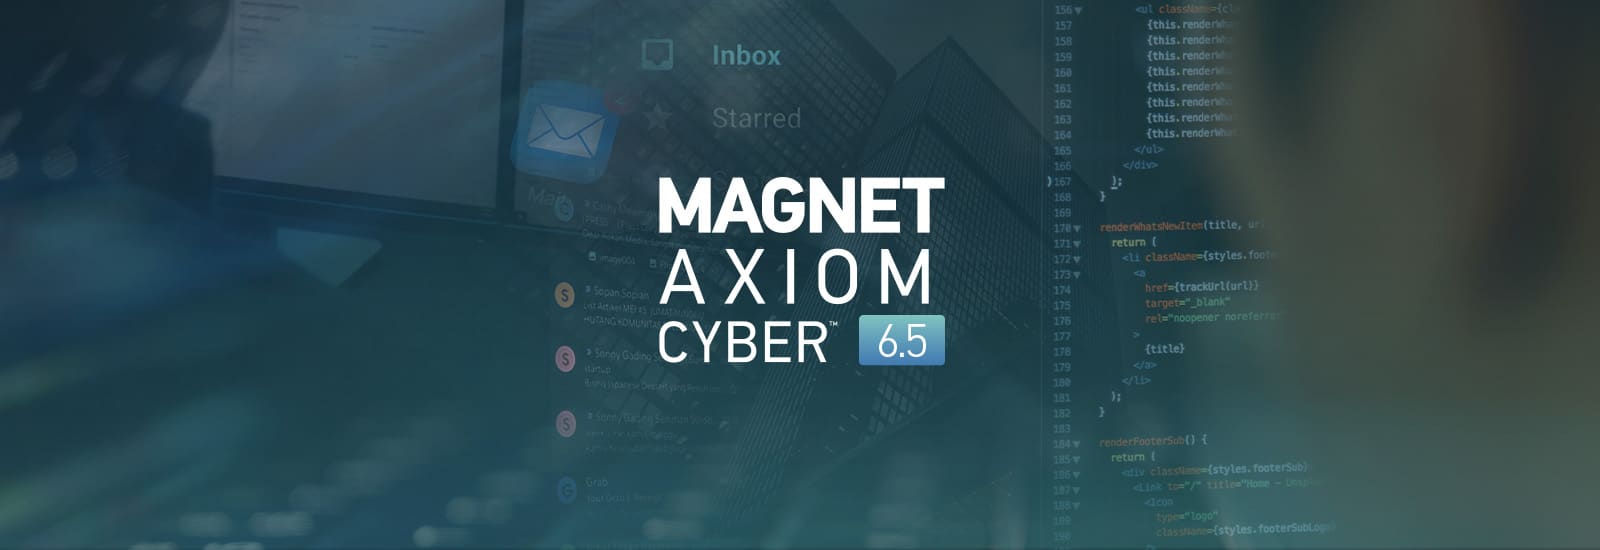 A decorative header for the Magnet AXIOM Cyber 6.5 release